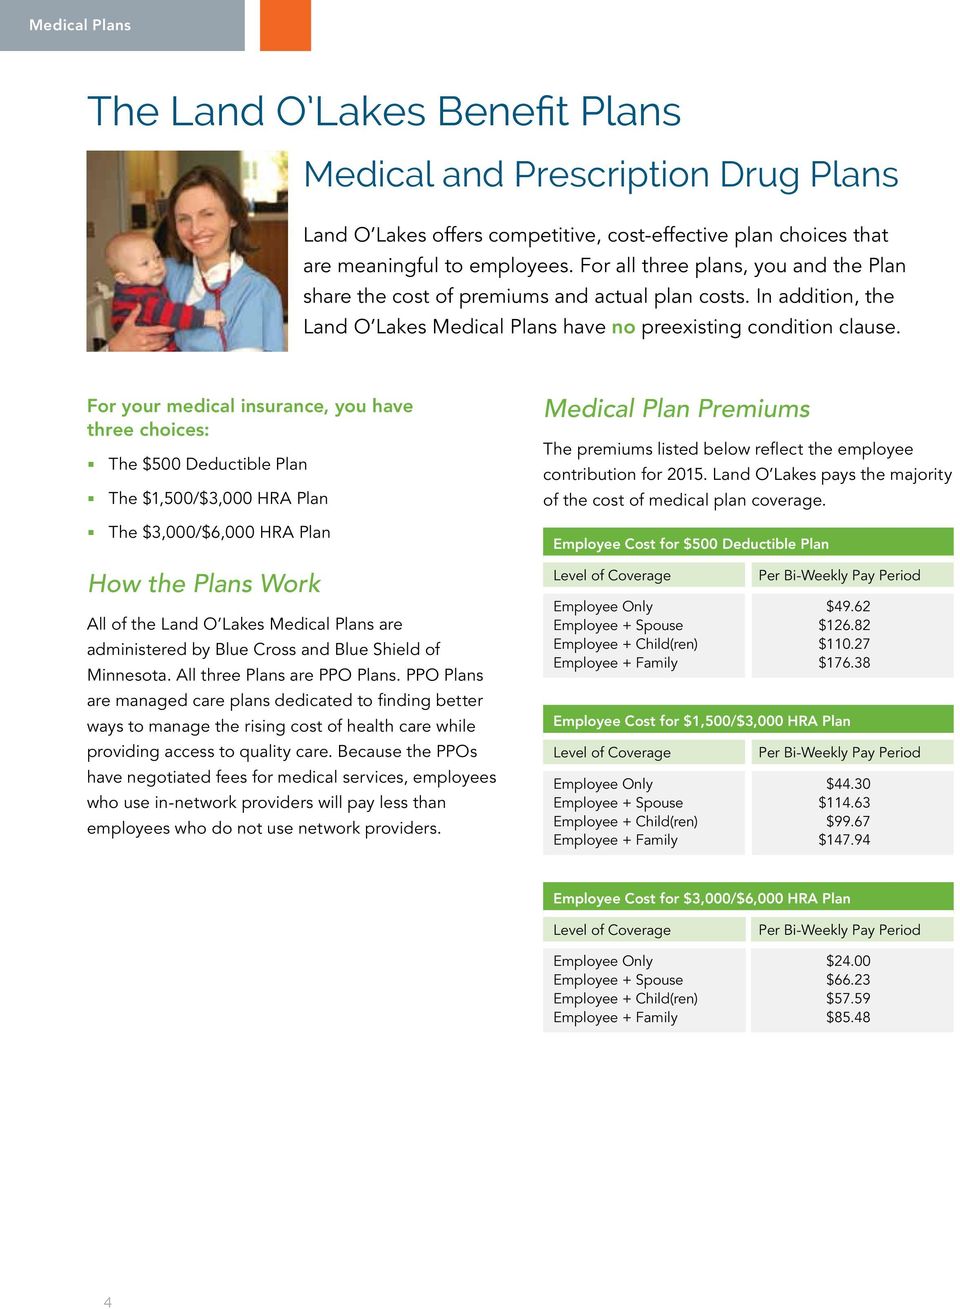 For your medical insurance, you have three choices: The $500 Deductible Plan The $1,500/$3,000 HRA Plan The $3,000/$6,000 HRA Plan How the Plans Work All of the Land O Lakes Medical Plans are